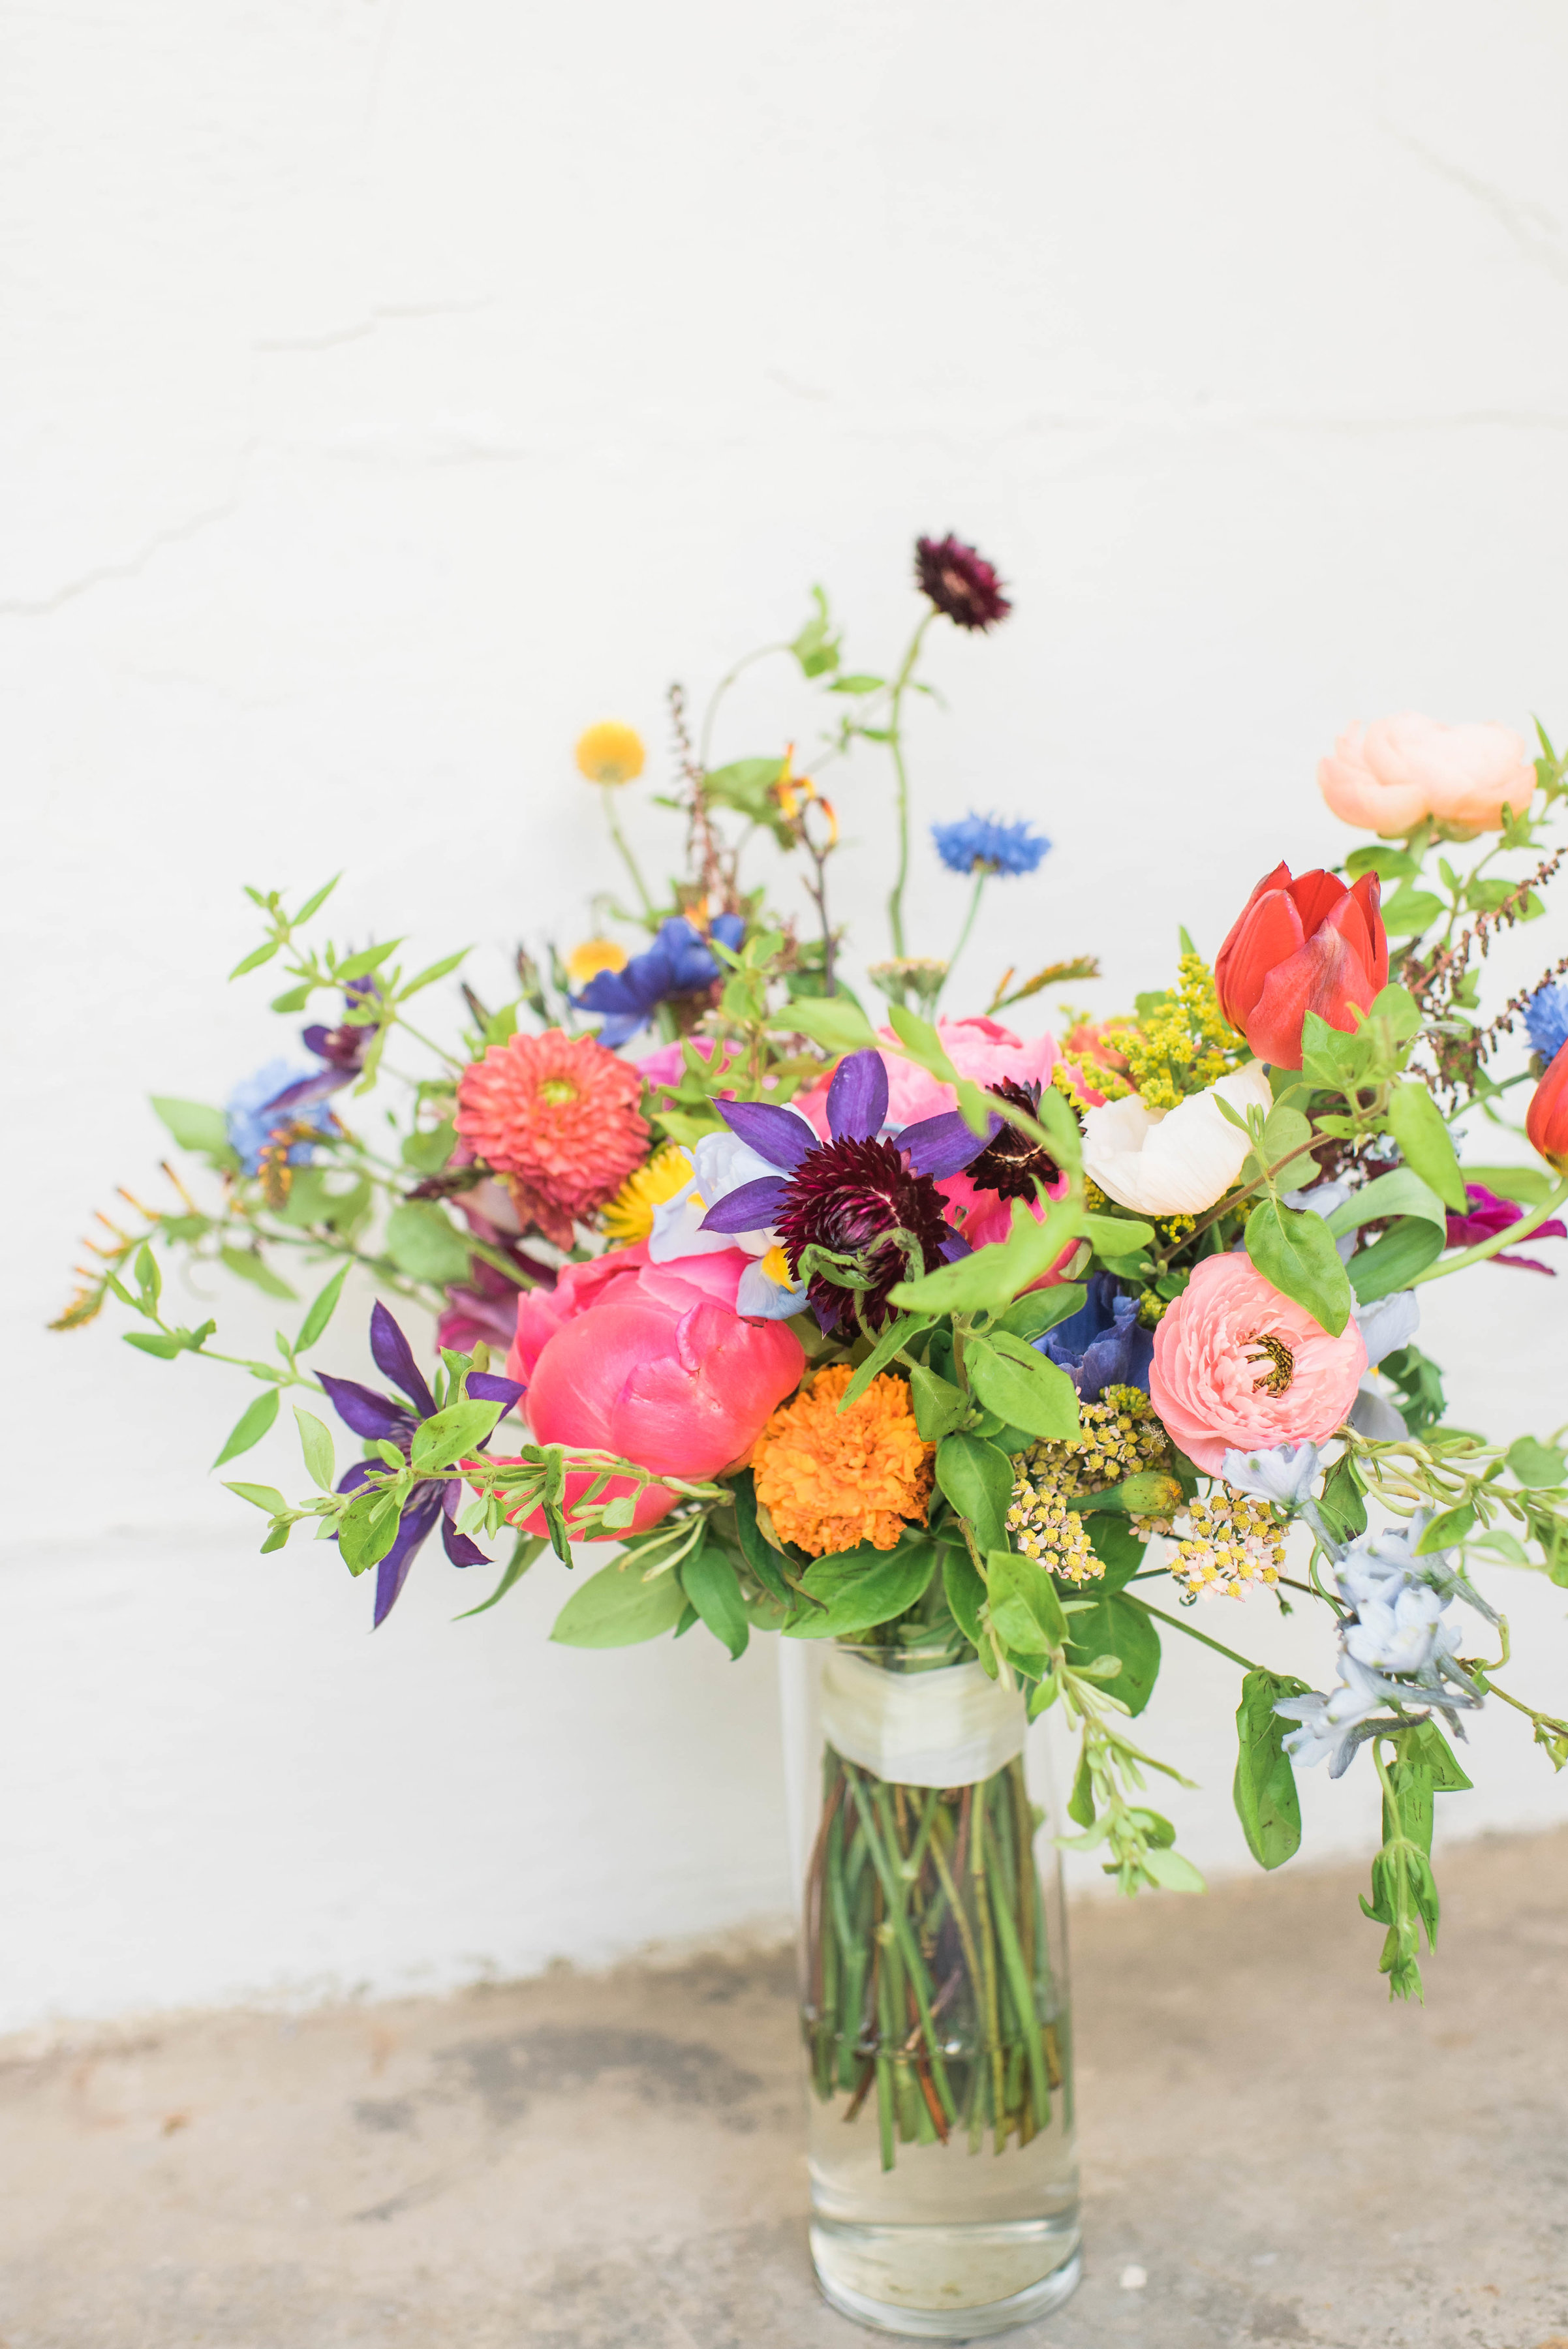 Natural, wildflower style bridal bouquet with bright colors // Chagall inspired wedding flower in Nashville